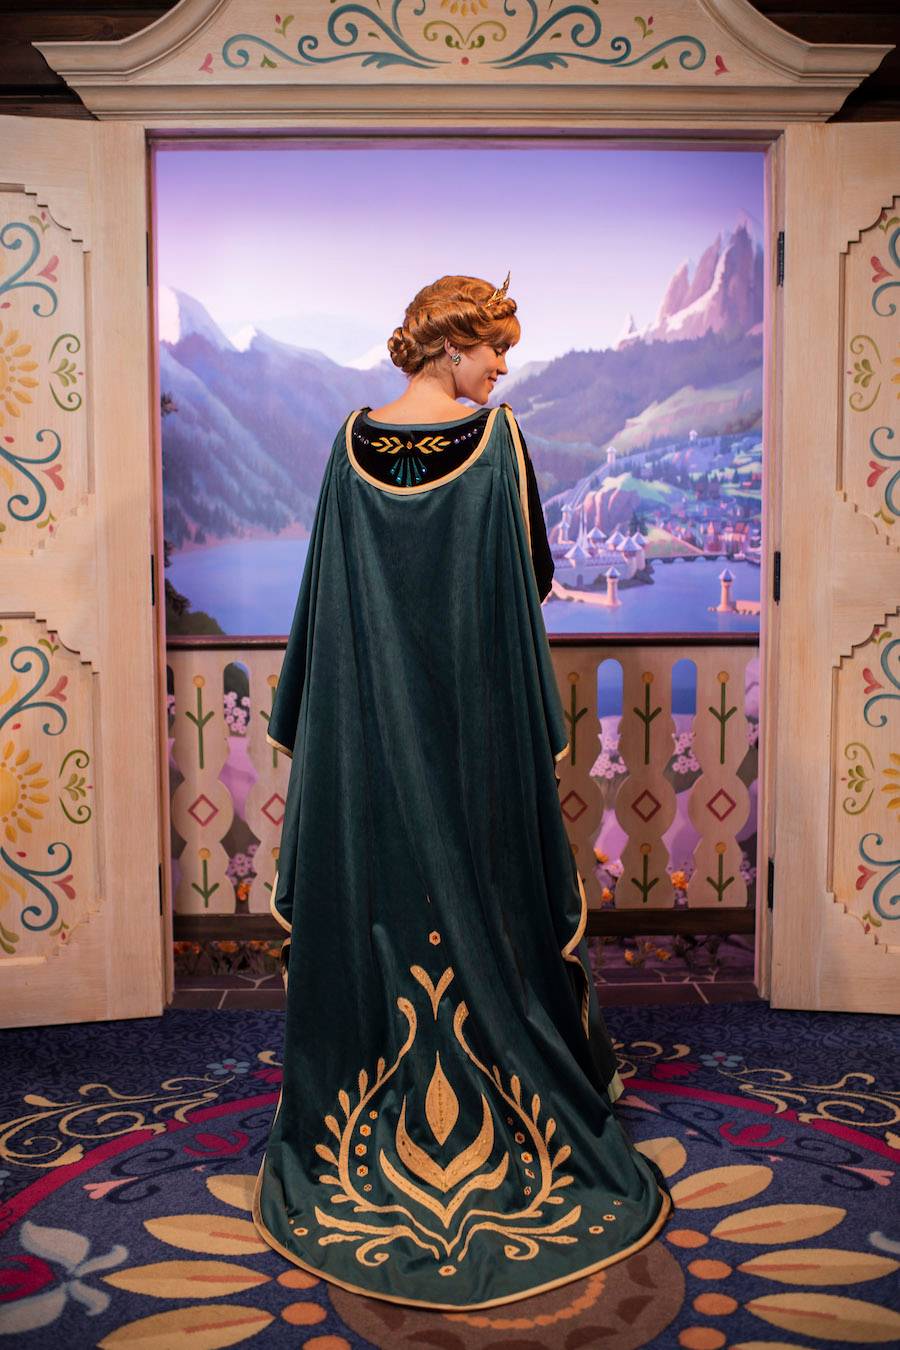 Frozen 2 meet and greet costumes for Anna and Elsa